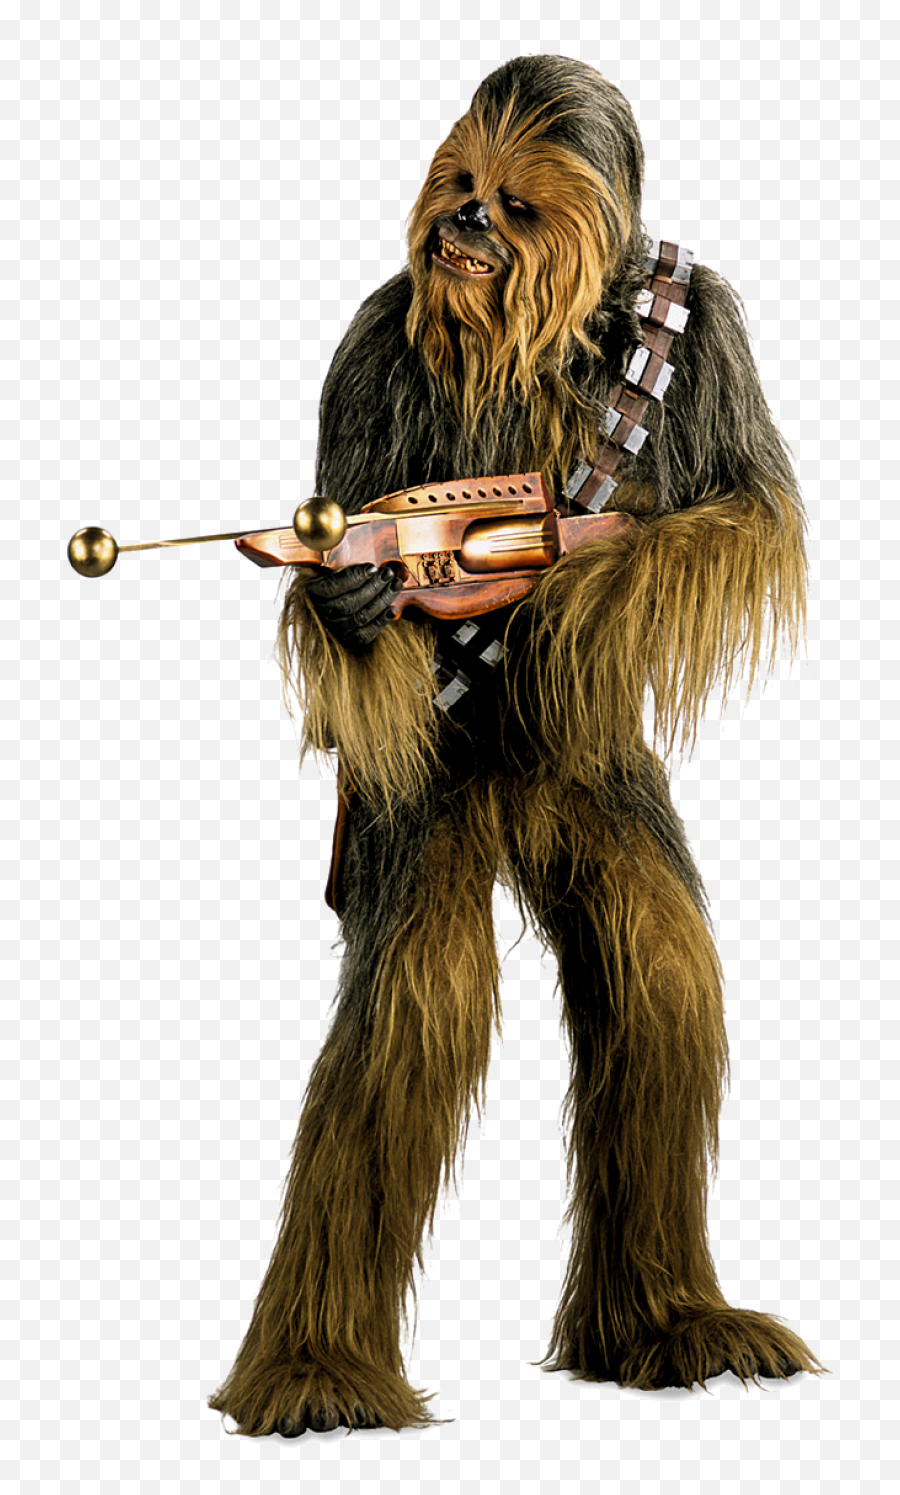 Star Wars Chewbacca Png 2 Image - Chewbacca Png,Chewbacca Png